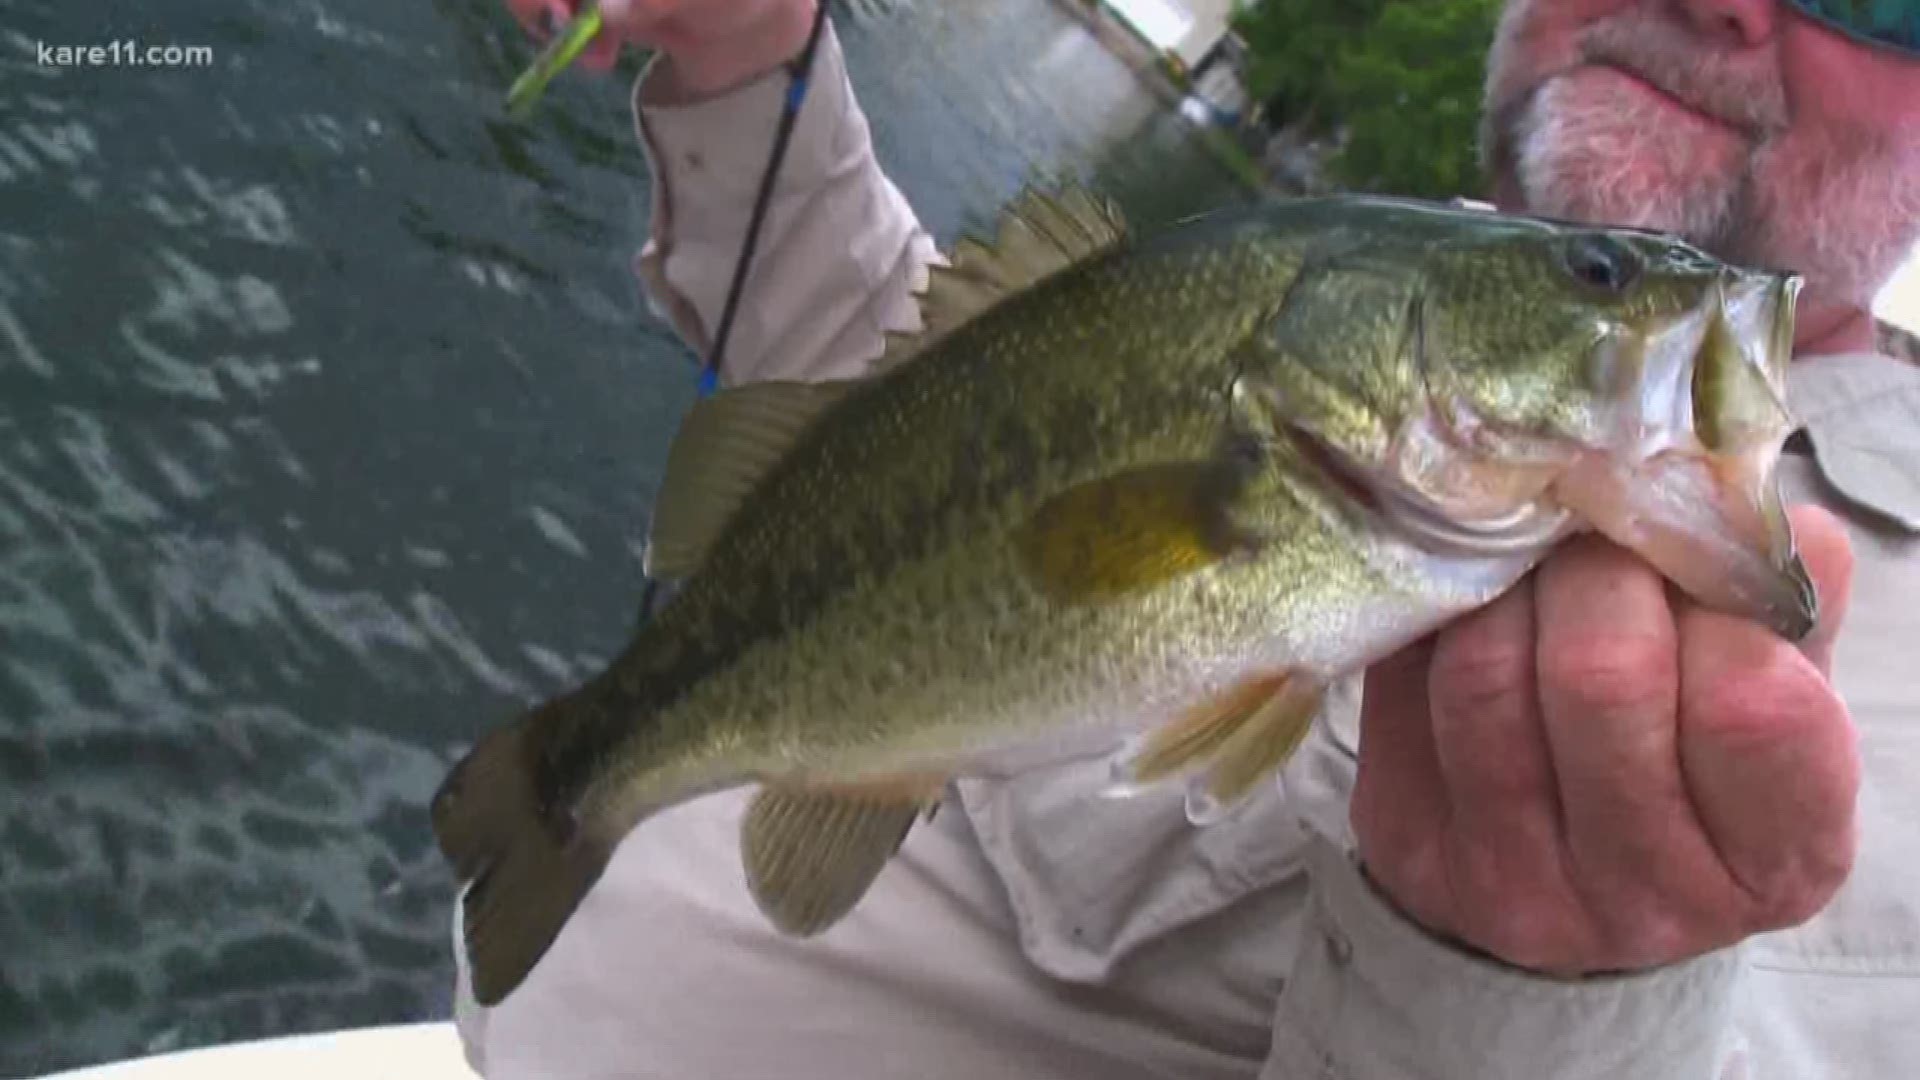 A late ice-out delaying the spawning period, hot weather warming the surface water temps, and the lack of weeds in the lakes have created ideal fishing conditions. https://kare11.tv/2GZTD9g